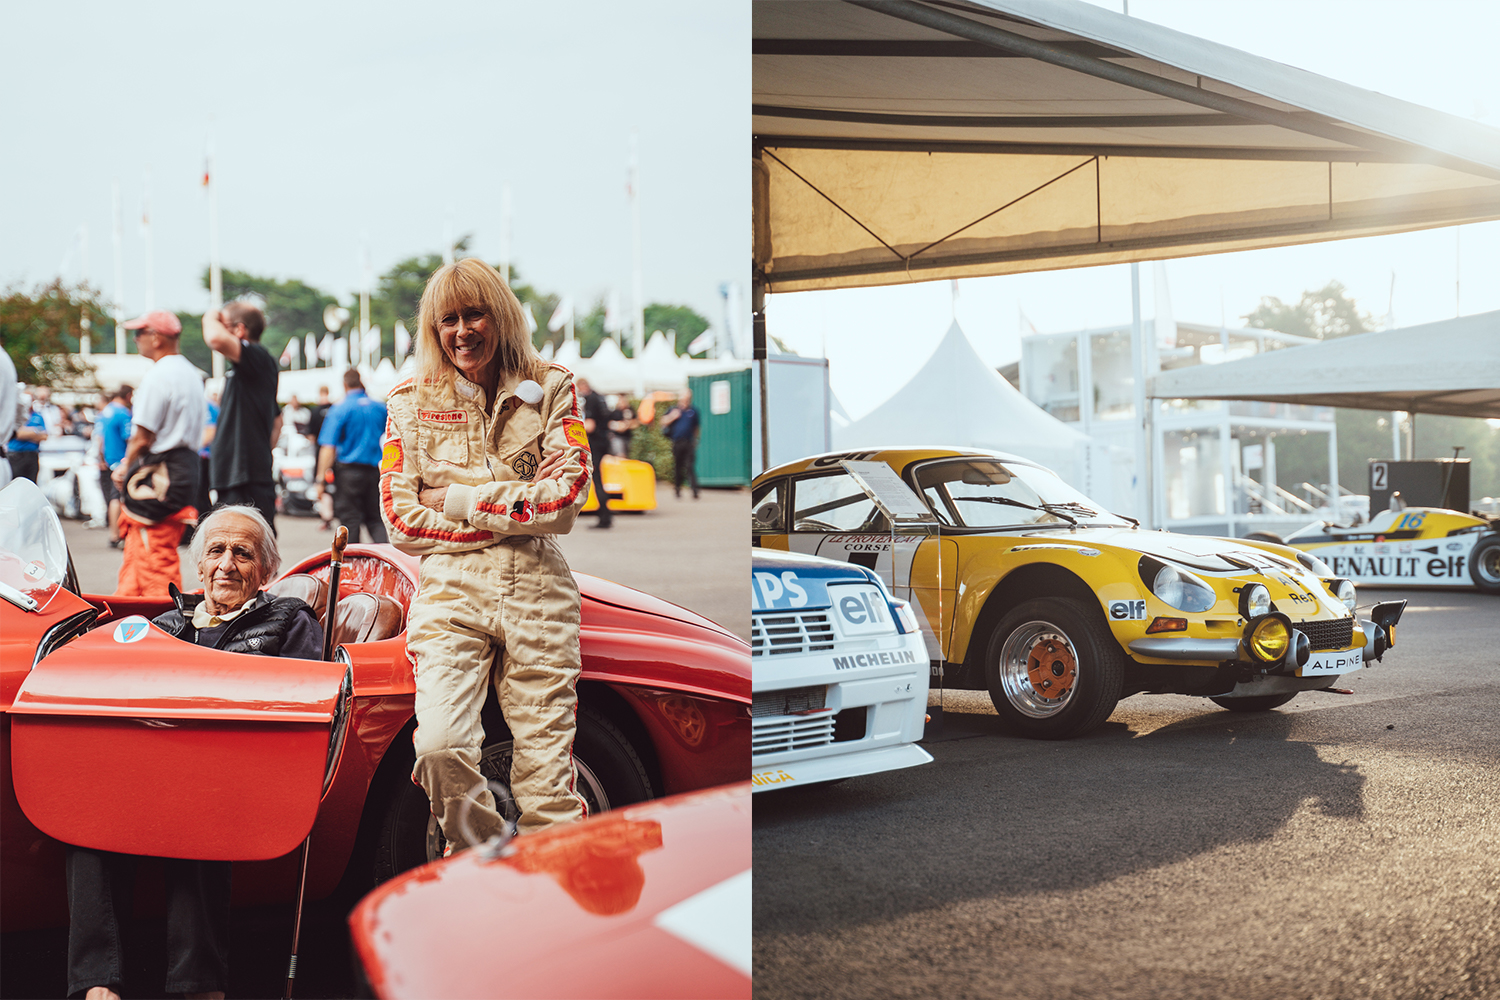 A man and woman in a classic car at the 2022 Goodwood Festival of Speed ​​on the left.  On the right, vintage cars exhibited under a tent.